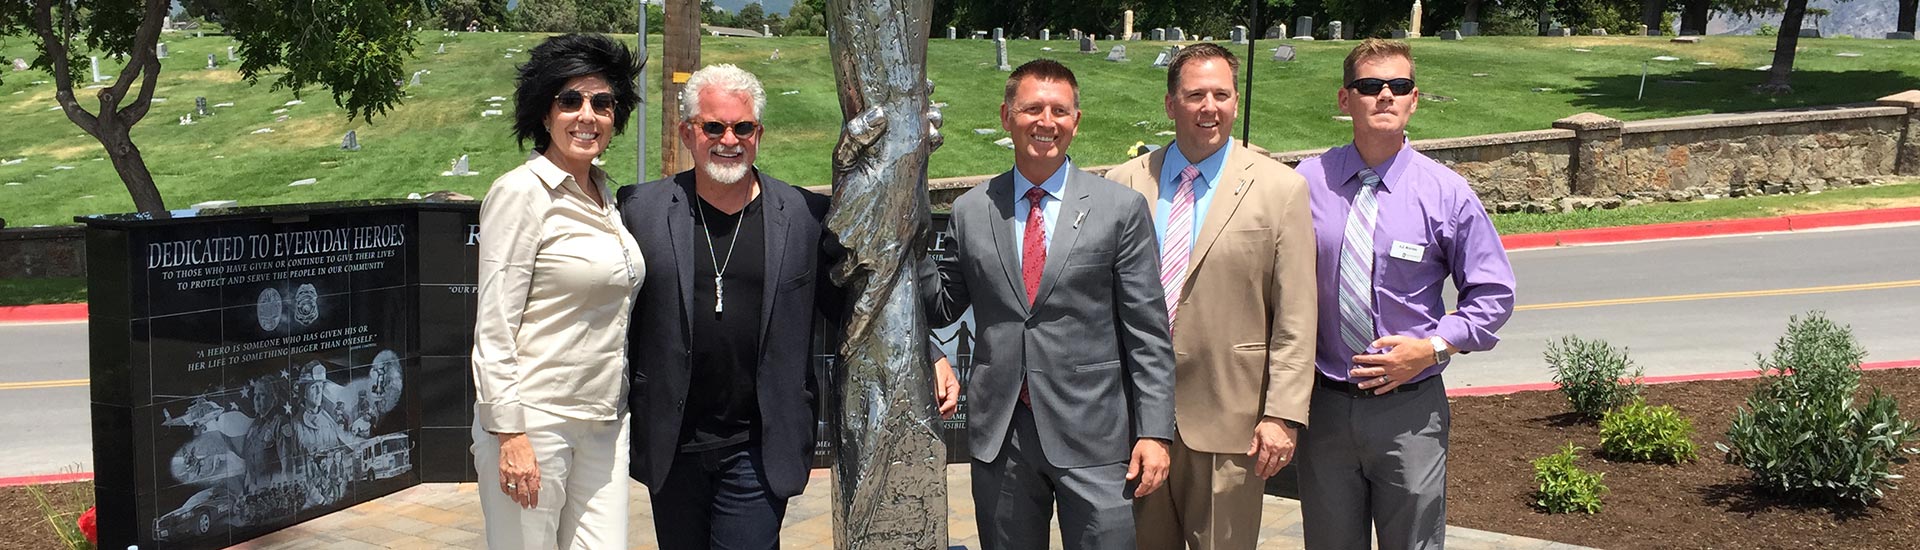 Statue of Responsibility Dedicated in American Fork